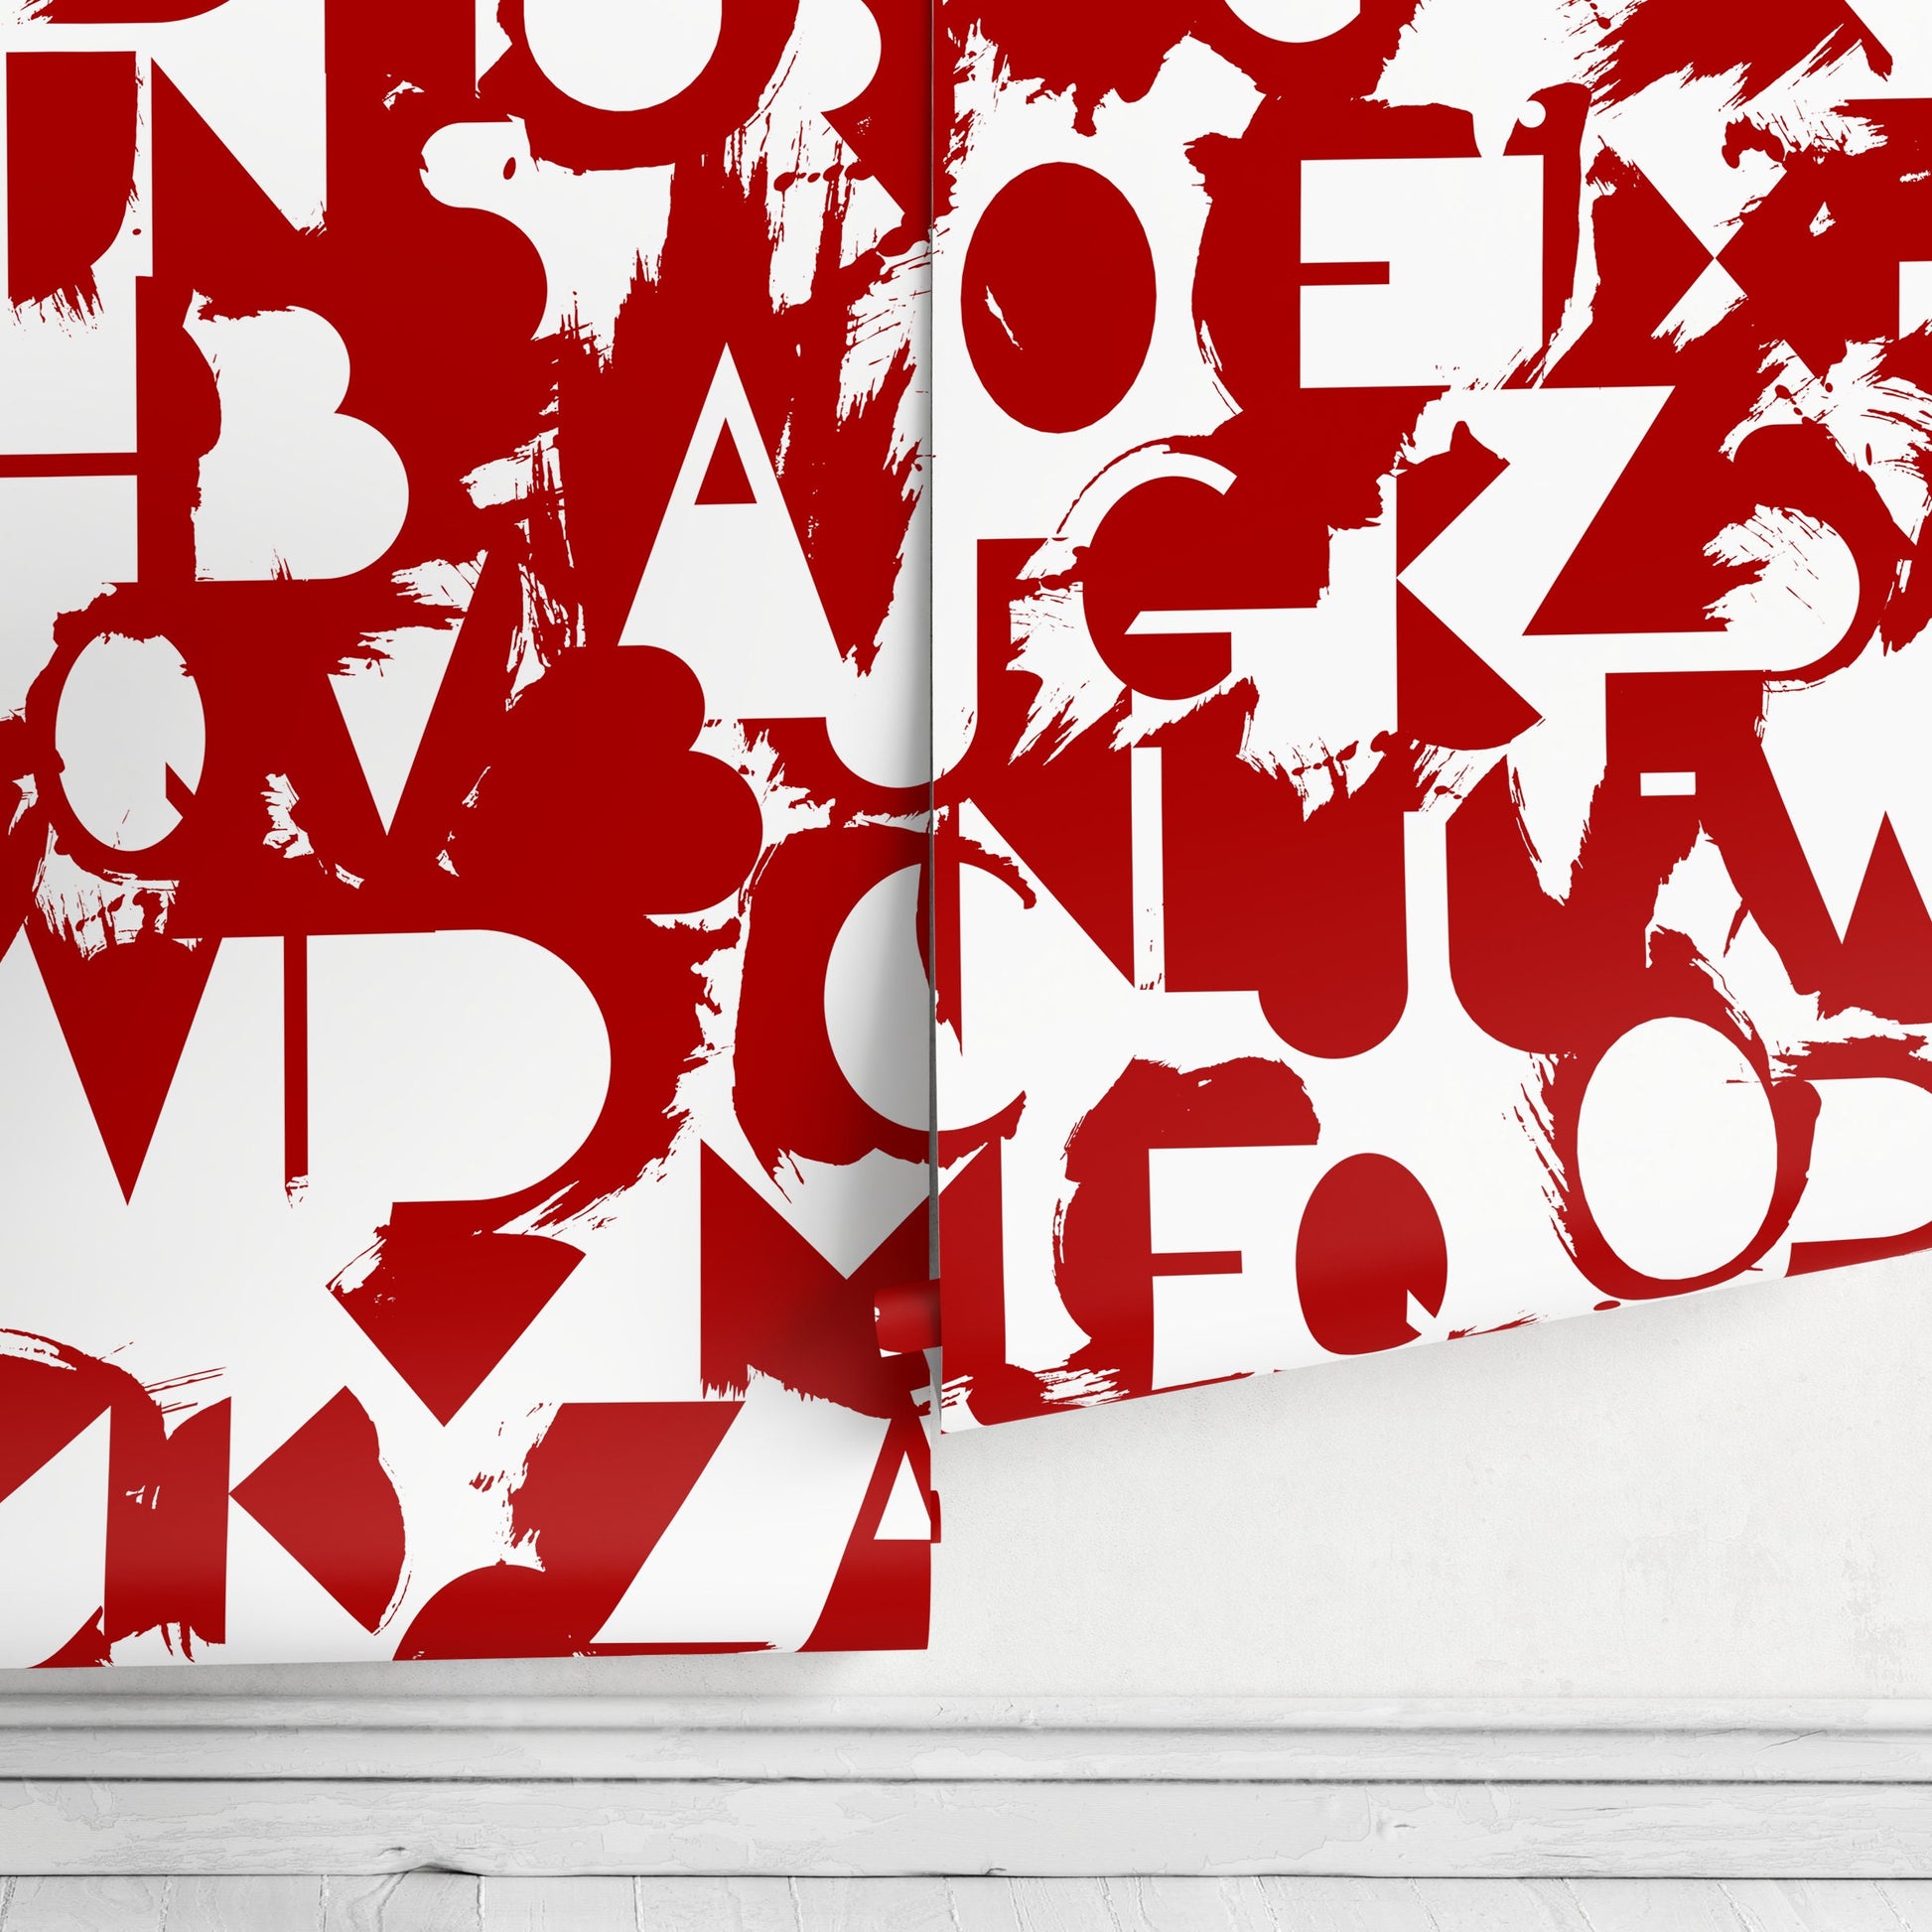 Abstract Letters Wallpaper Removable Wallpaper Home Decor Wall Art Wall Decor Room Decor / Red Typography Abstract Wallpaper - B711